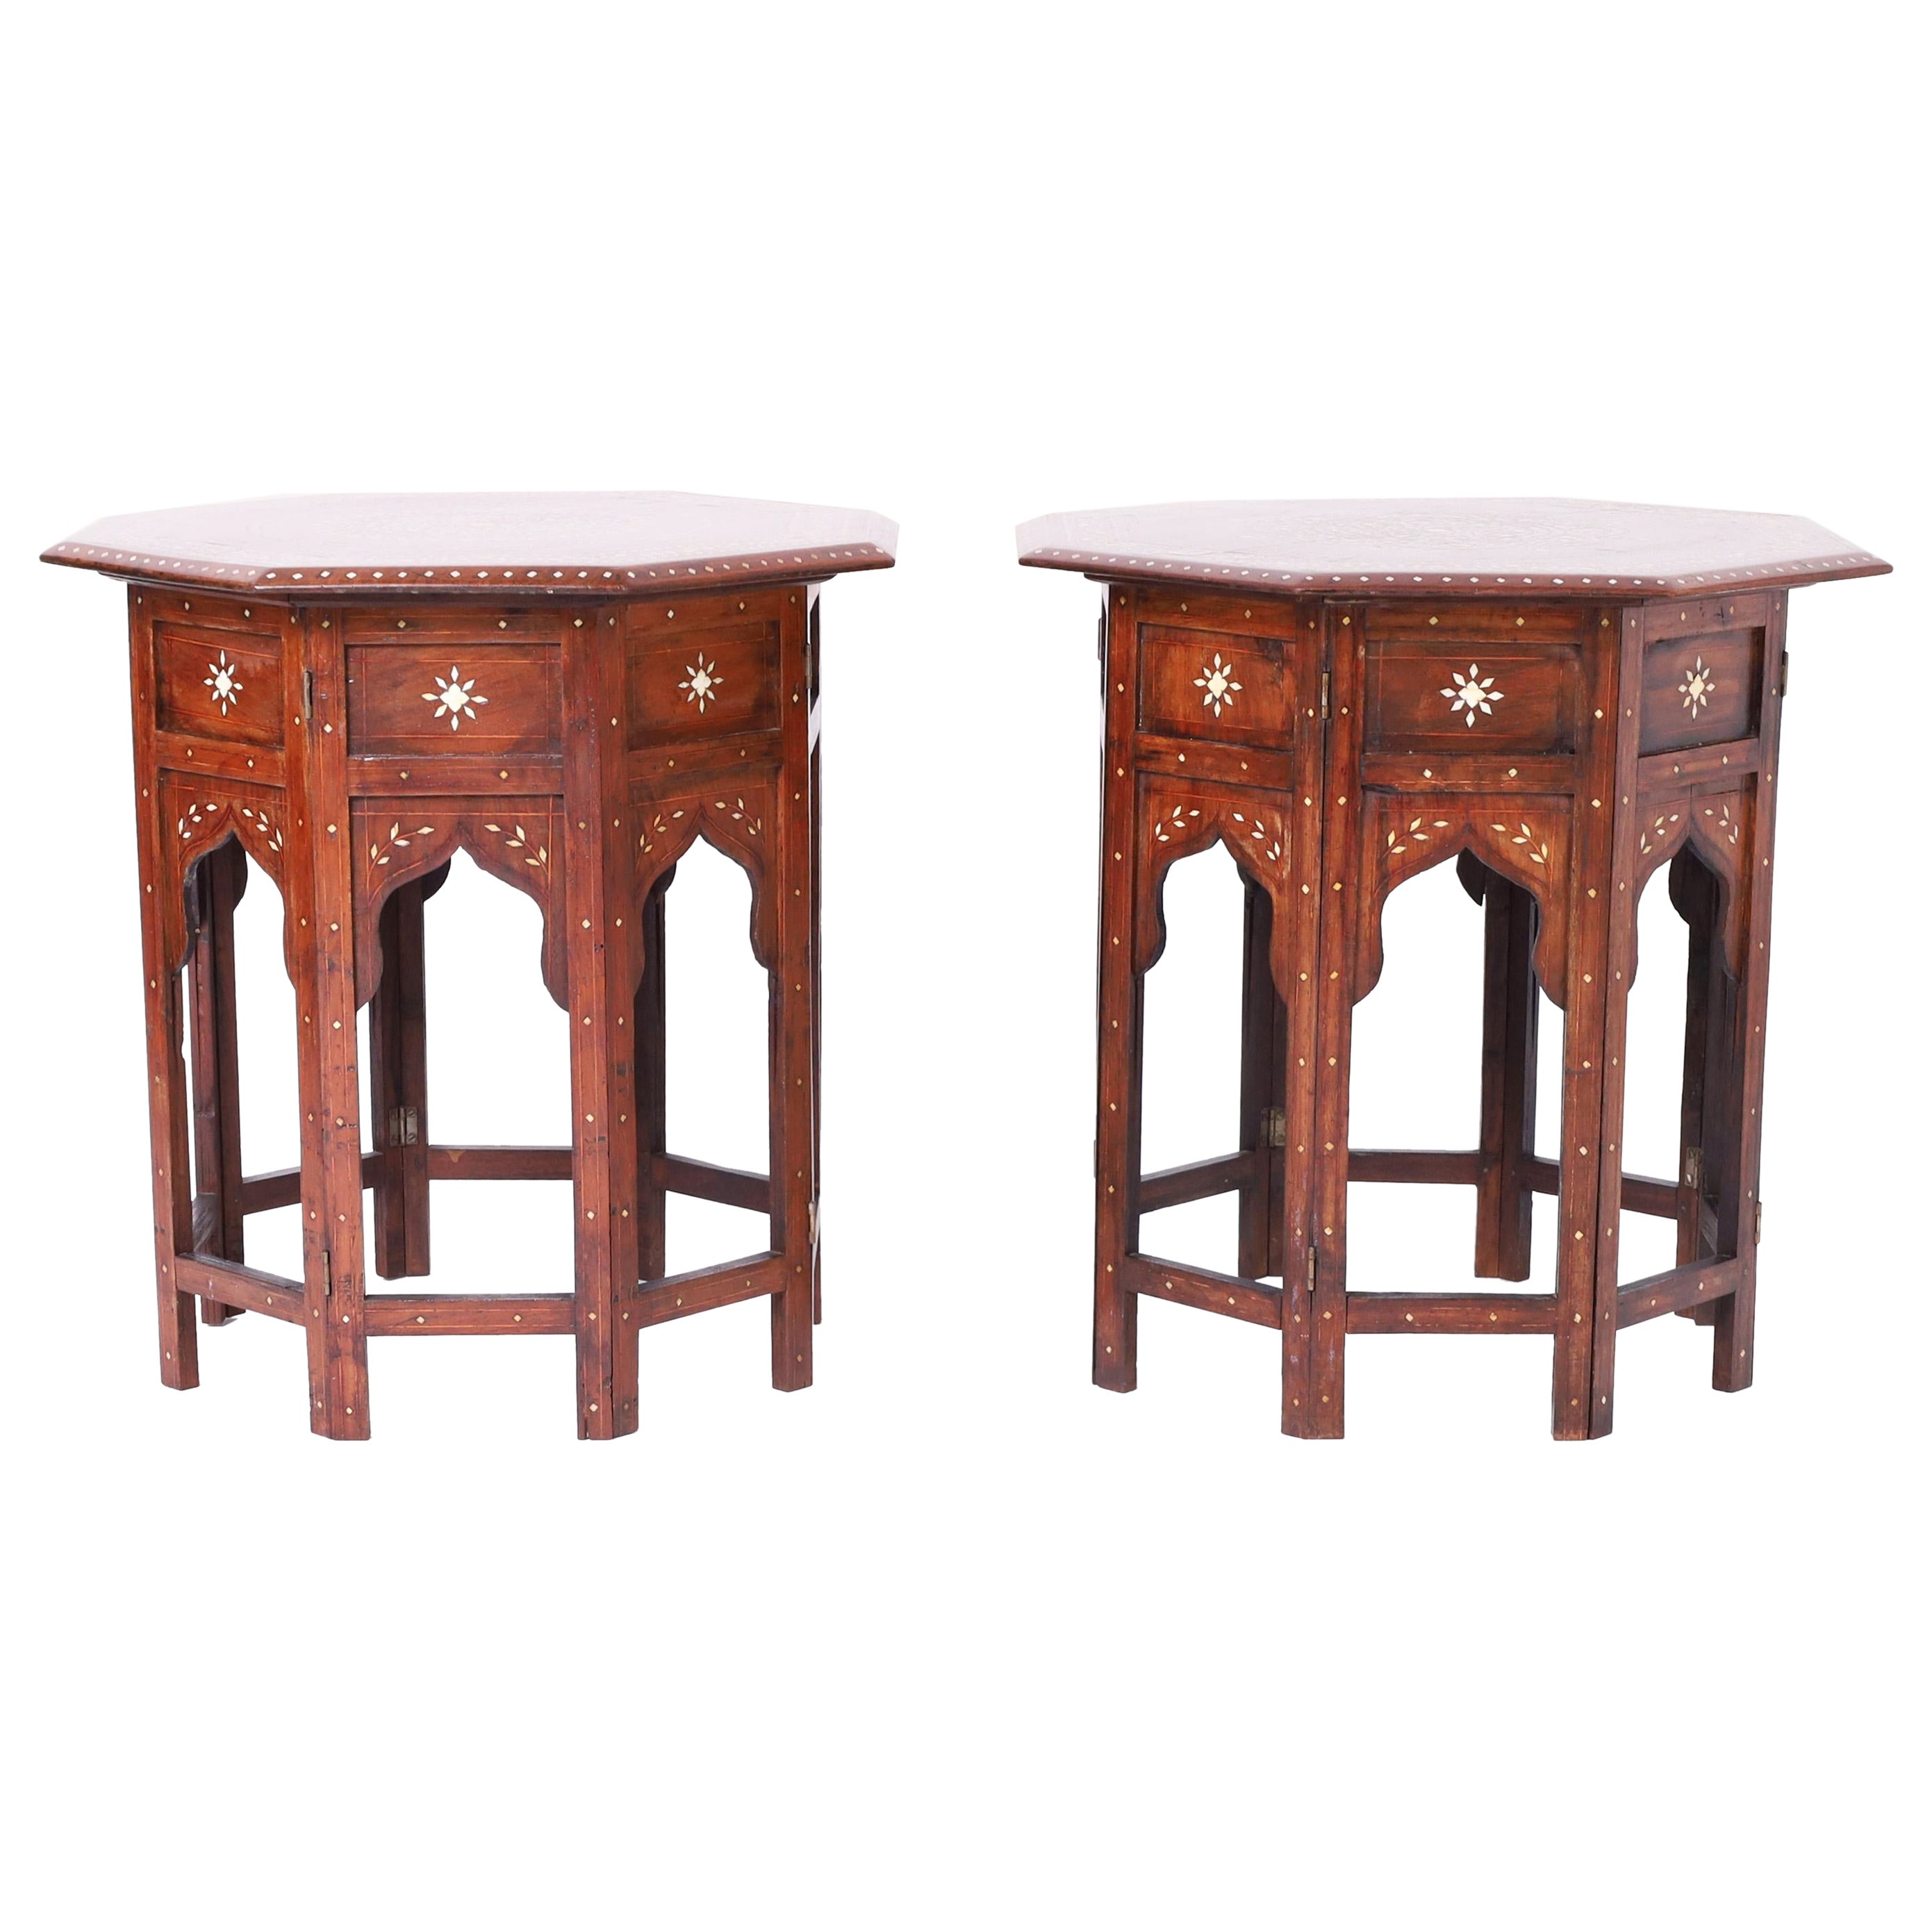 Pair of Antique Moroccan Inlaid Stands or Tables For Sale